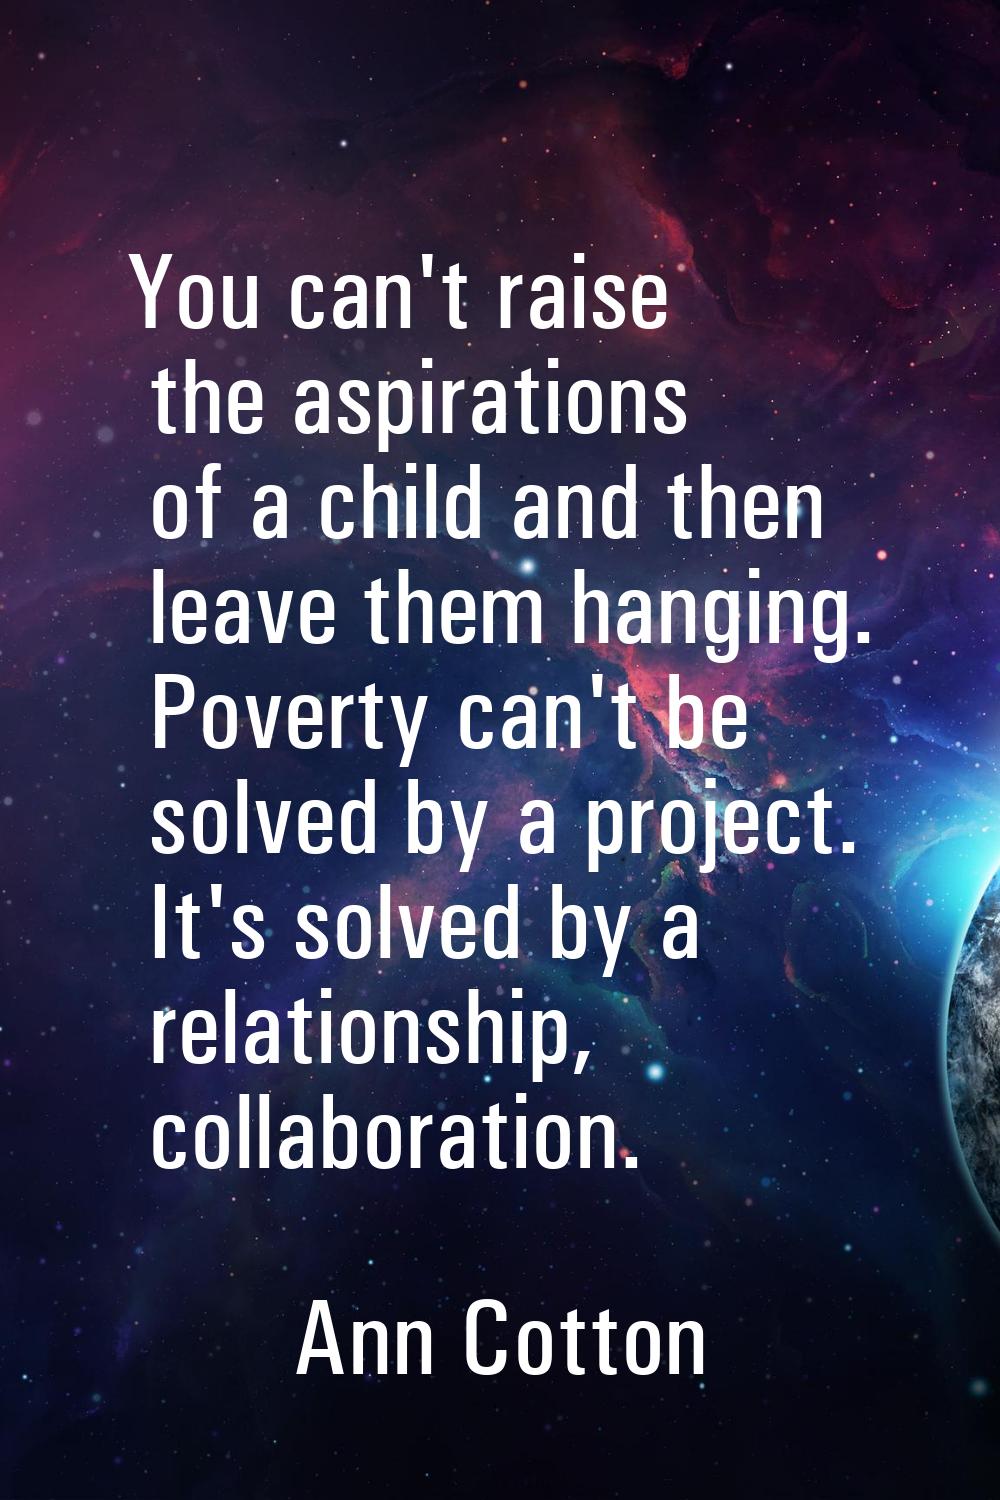 You can't raise the aspirations of a child and then leave them hanging. Poverty can't be solved by 